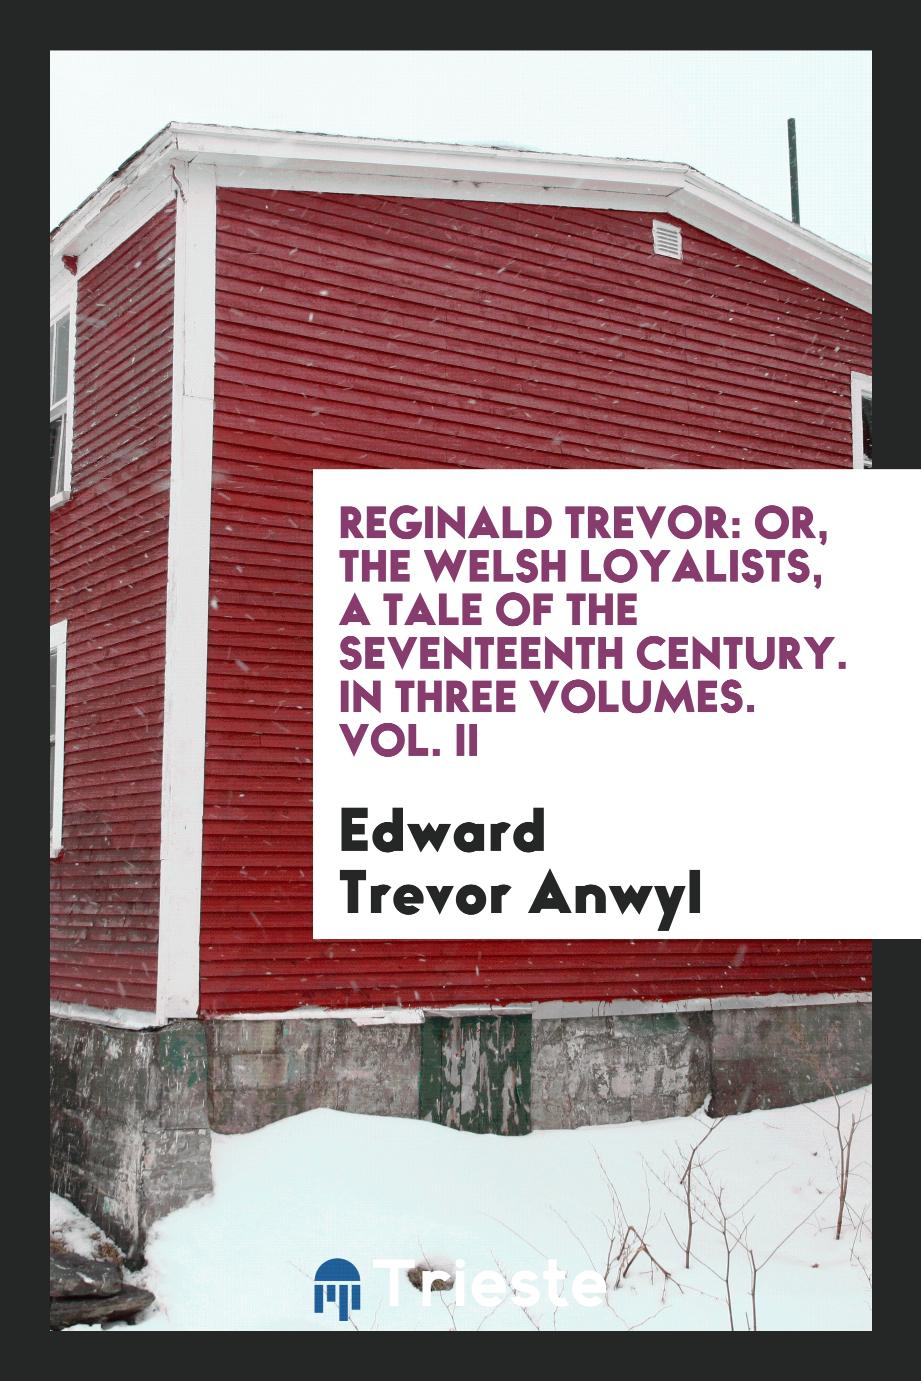 Reginald Trevor: or, The Welsh Loyalists, a tale of the seventeenth century. In three volumes. Vol. II